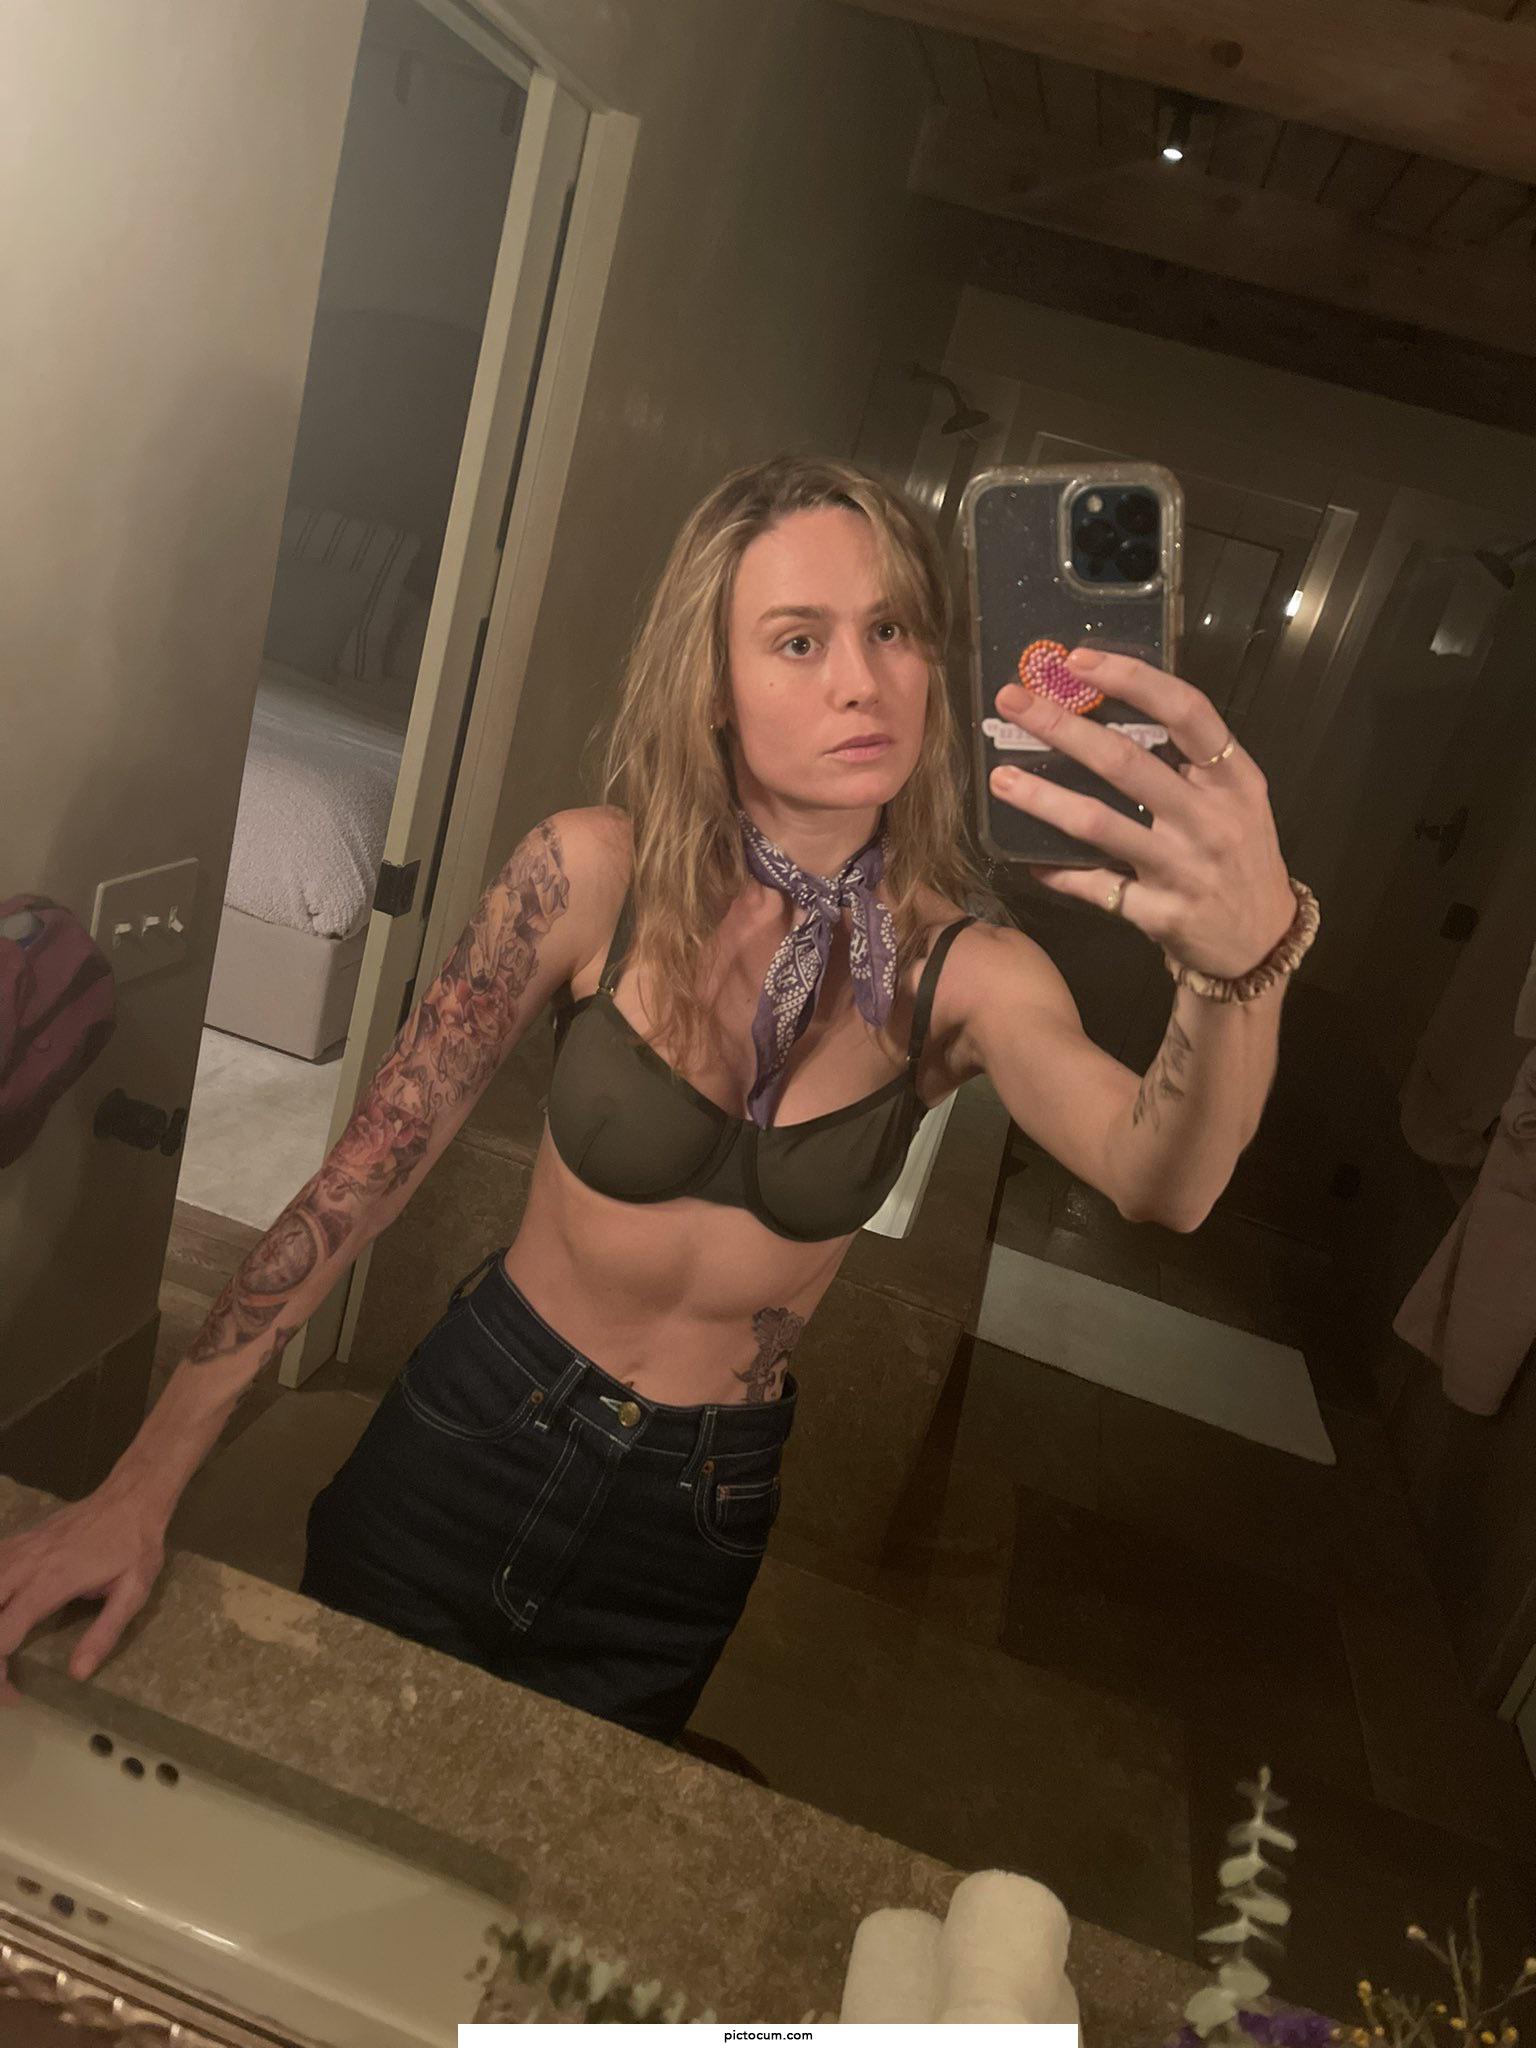 Brie Larson with temporary tattoos and a see through bra